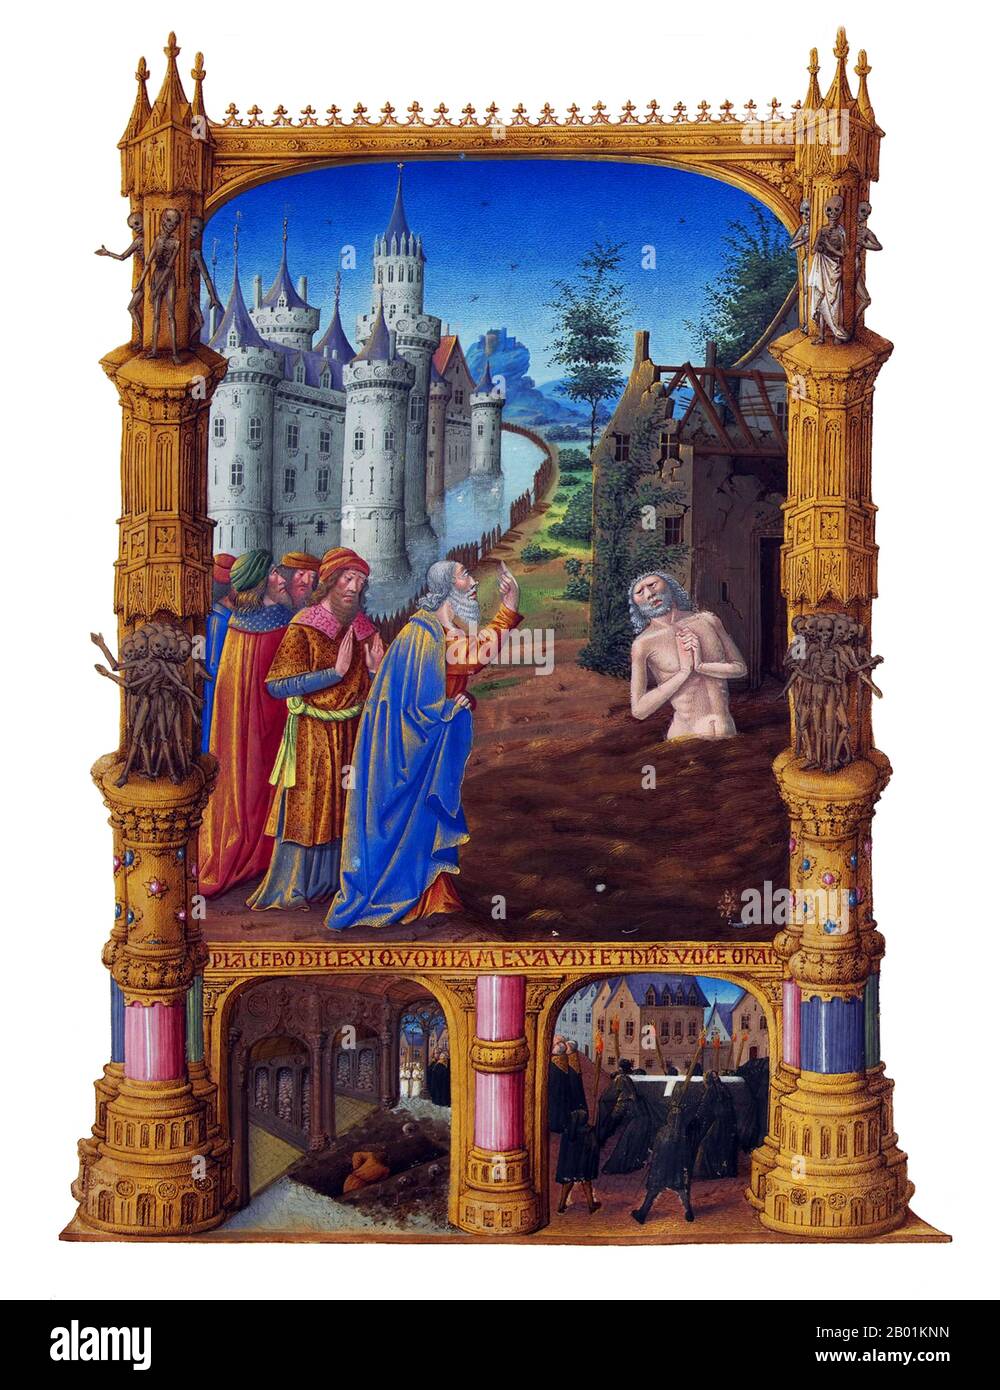 France/Netherlands: 'Job Mocked by His Friends'. Folio from 'Les Très Riches Heures du duc de Berry (The Very Rich Hours of the Duke of Berry)' by the Limbourg brothers (Herman, Paul and Jean), c. 1410  Job is the central character of the Book of Job in the Hebrew Bible. Job is also recognised as a prophet of God in the Qur'an.  The Book of Job begins with an introduction to Job's character. He is described as a blessed man who lives righteously. God's praise of Job prompts Satan to challenge Job's integrity and suggesting that Job serves God simply because he protects him. Stock Photo